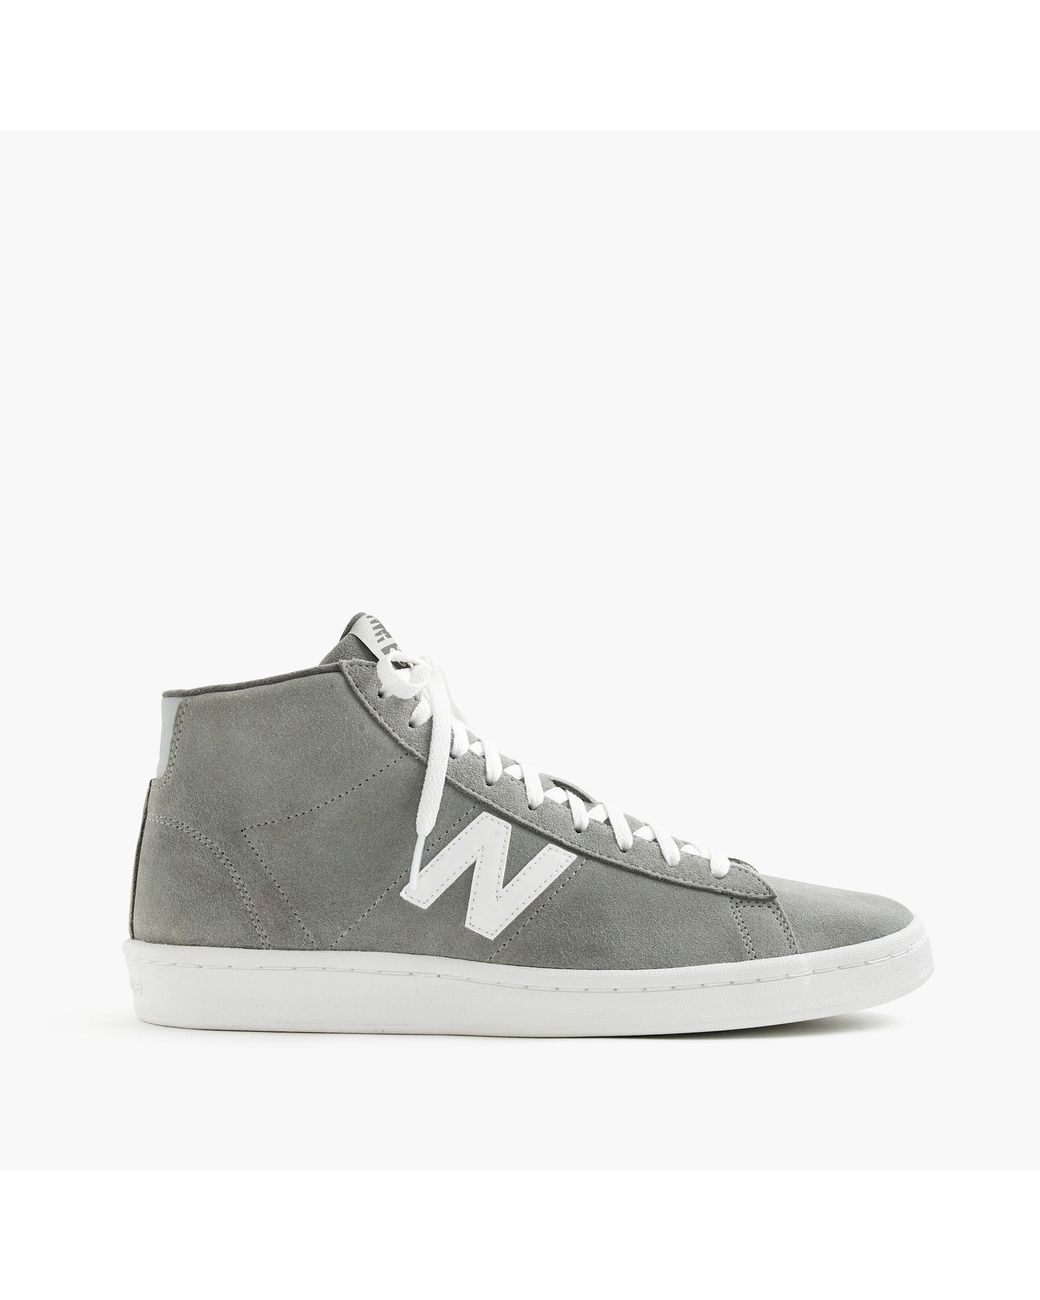 J.Crew New Balance 891 High-top Sneakers in Gray for Men | Lyst